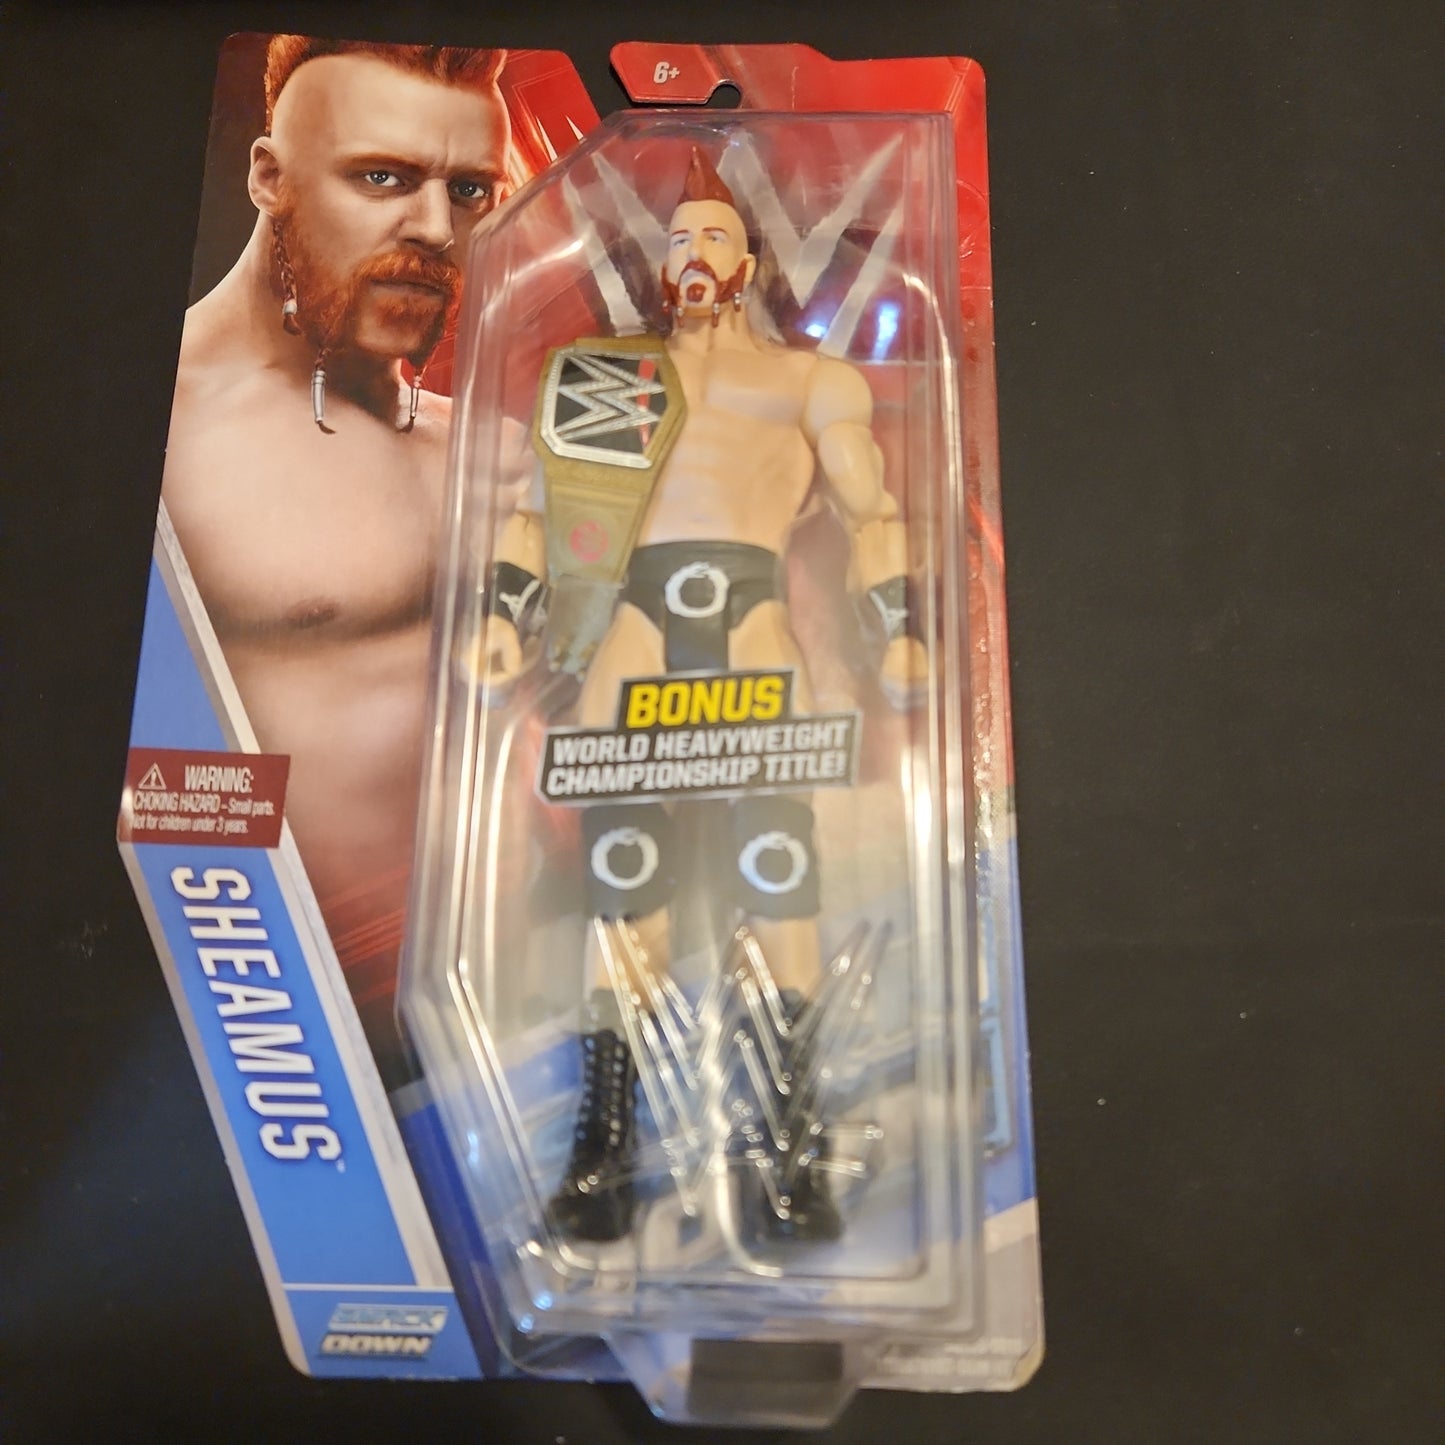 MATTEL RE-CREATE THE ACTION OF WWE SHEAMUS